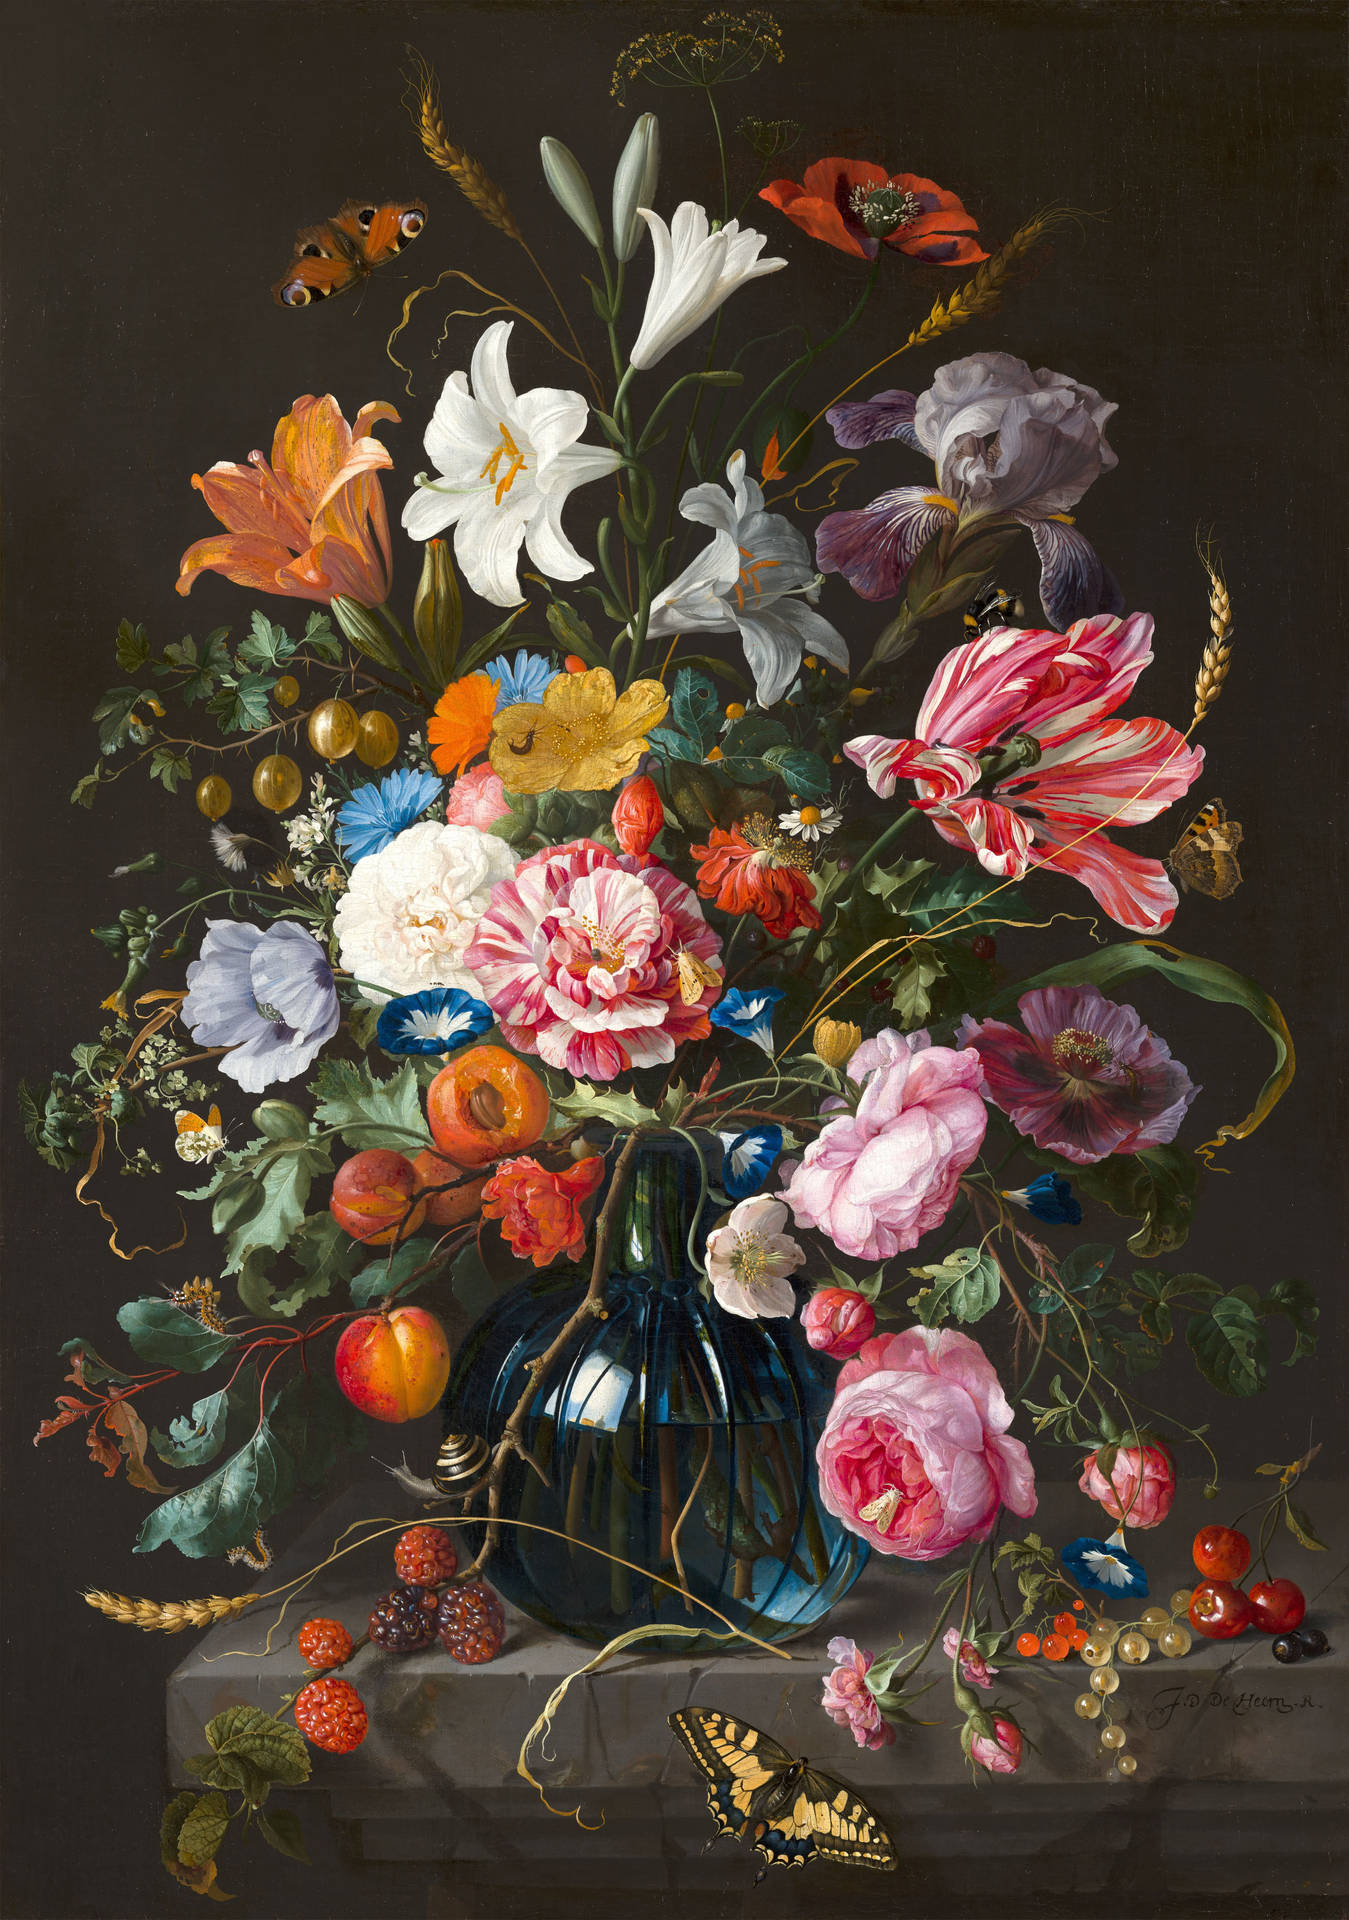 Vase Of Flowers Painting By De Heem Background